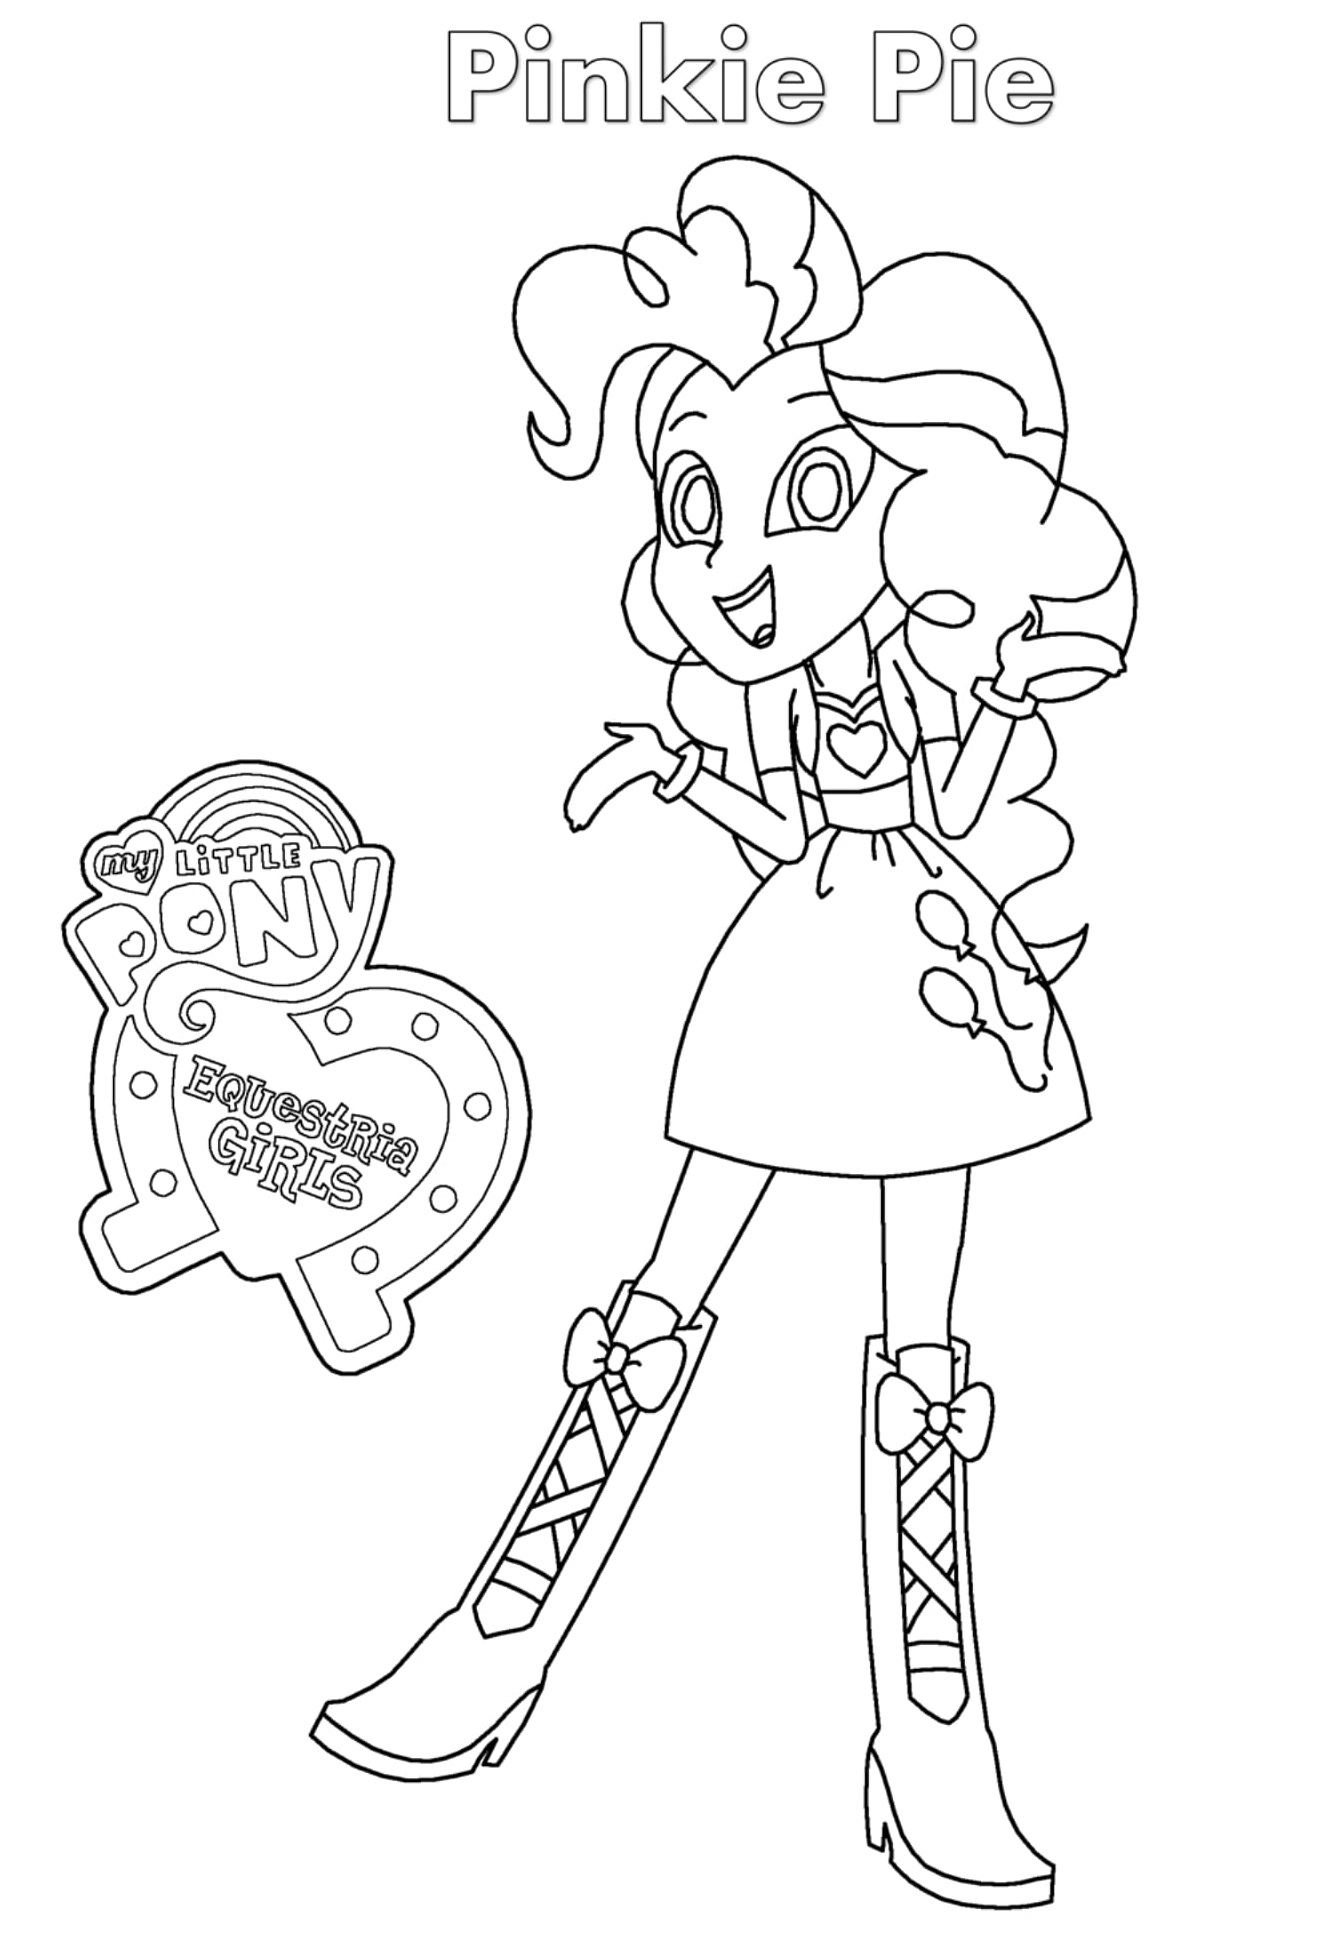 Equestria Girls Pinkie Pie Coloring Page